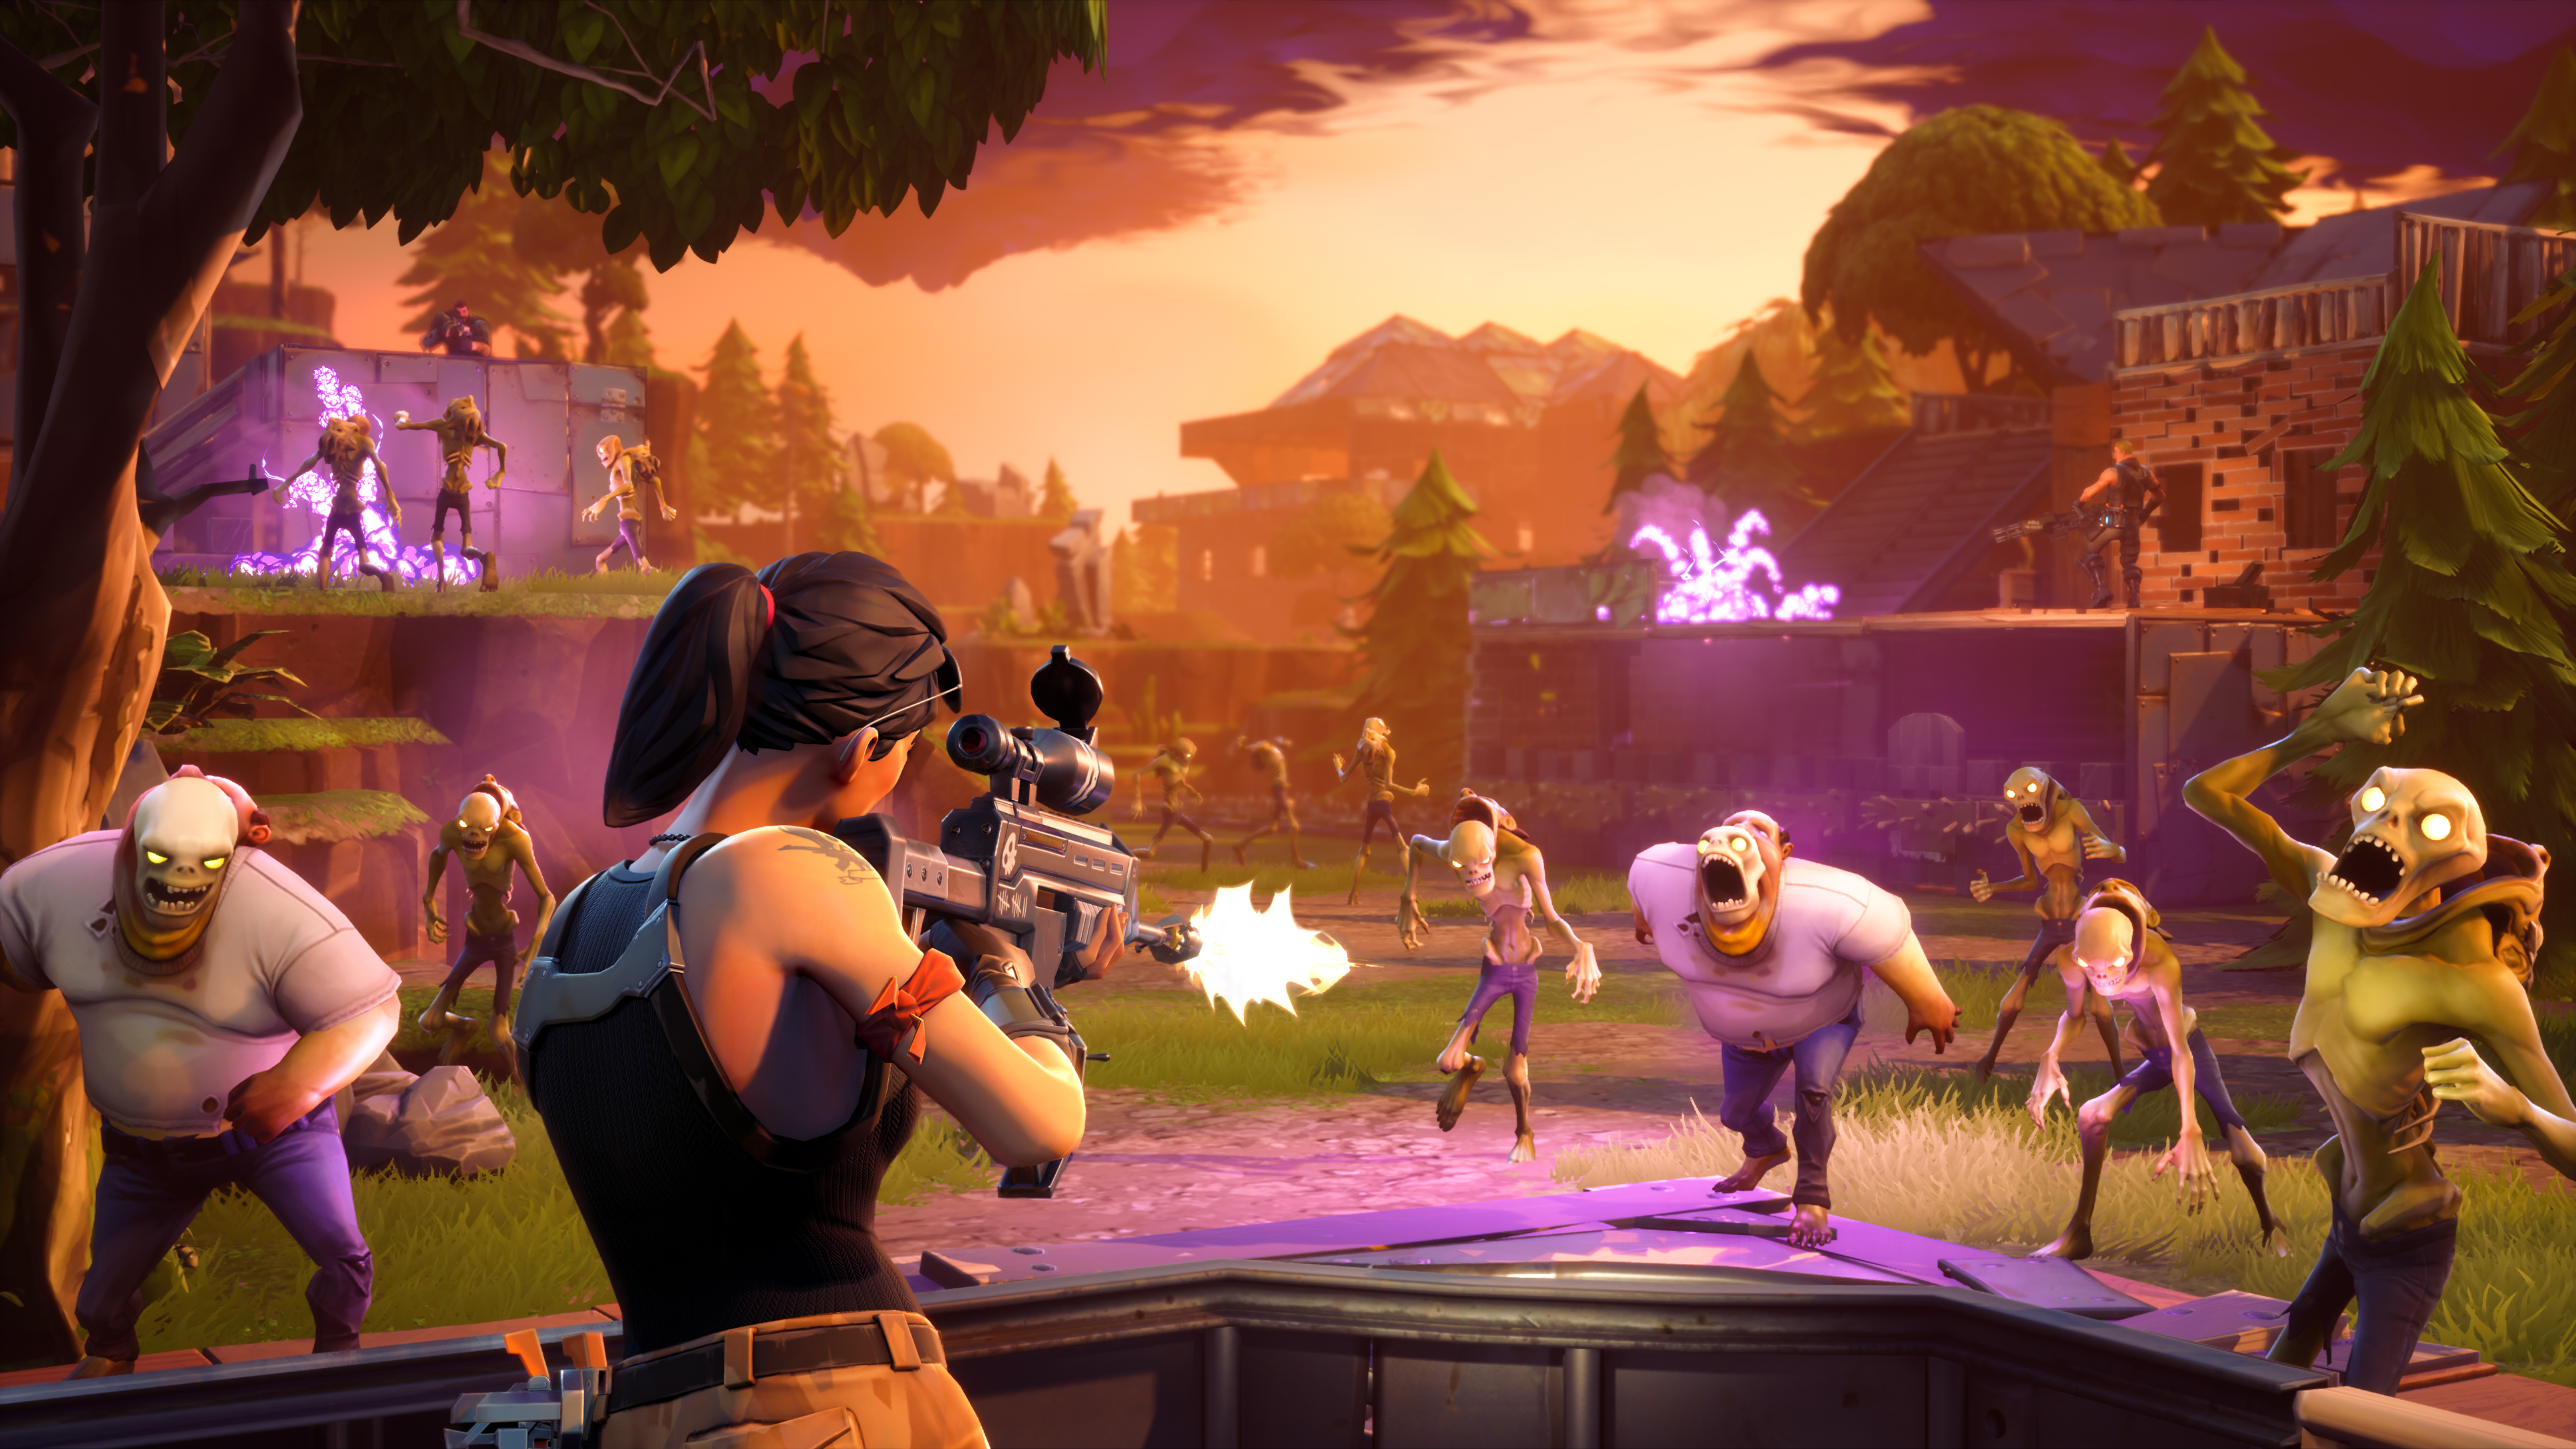 3 Ways to Make Money Playing Fortnite, the Free Online Game That's Gone Viral